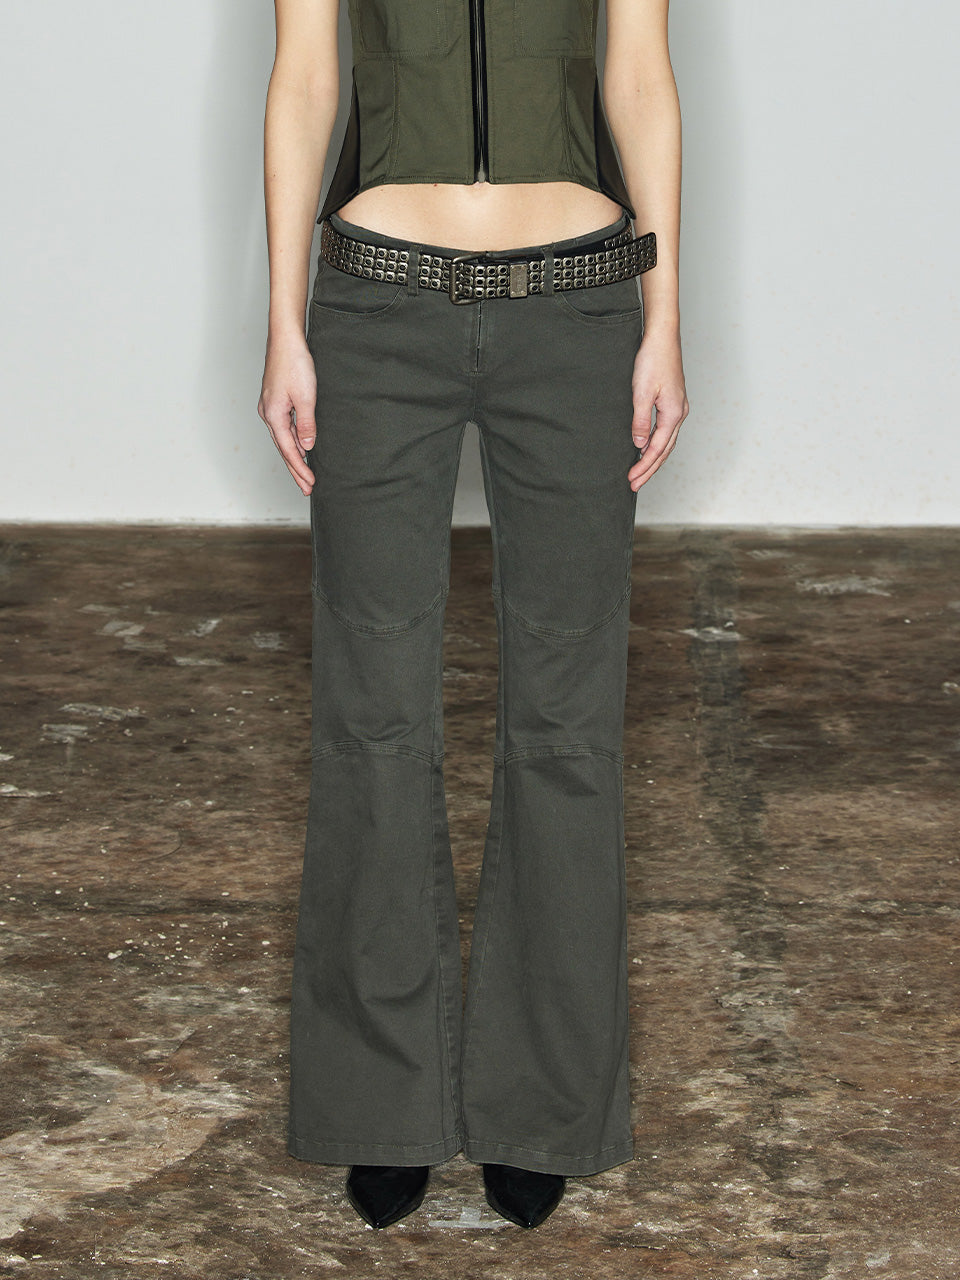 NUTH "Waist Line Partner" Flared Trousers